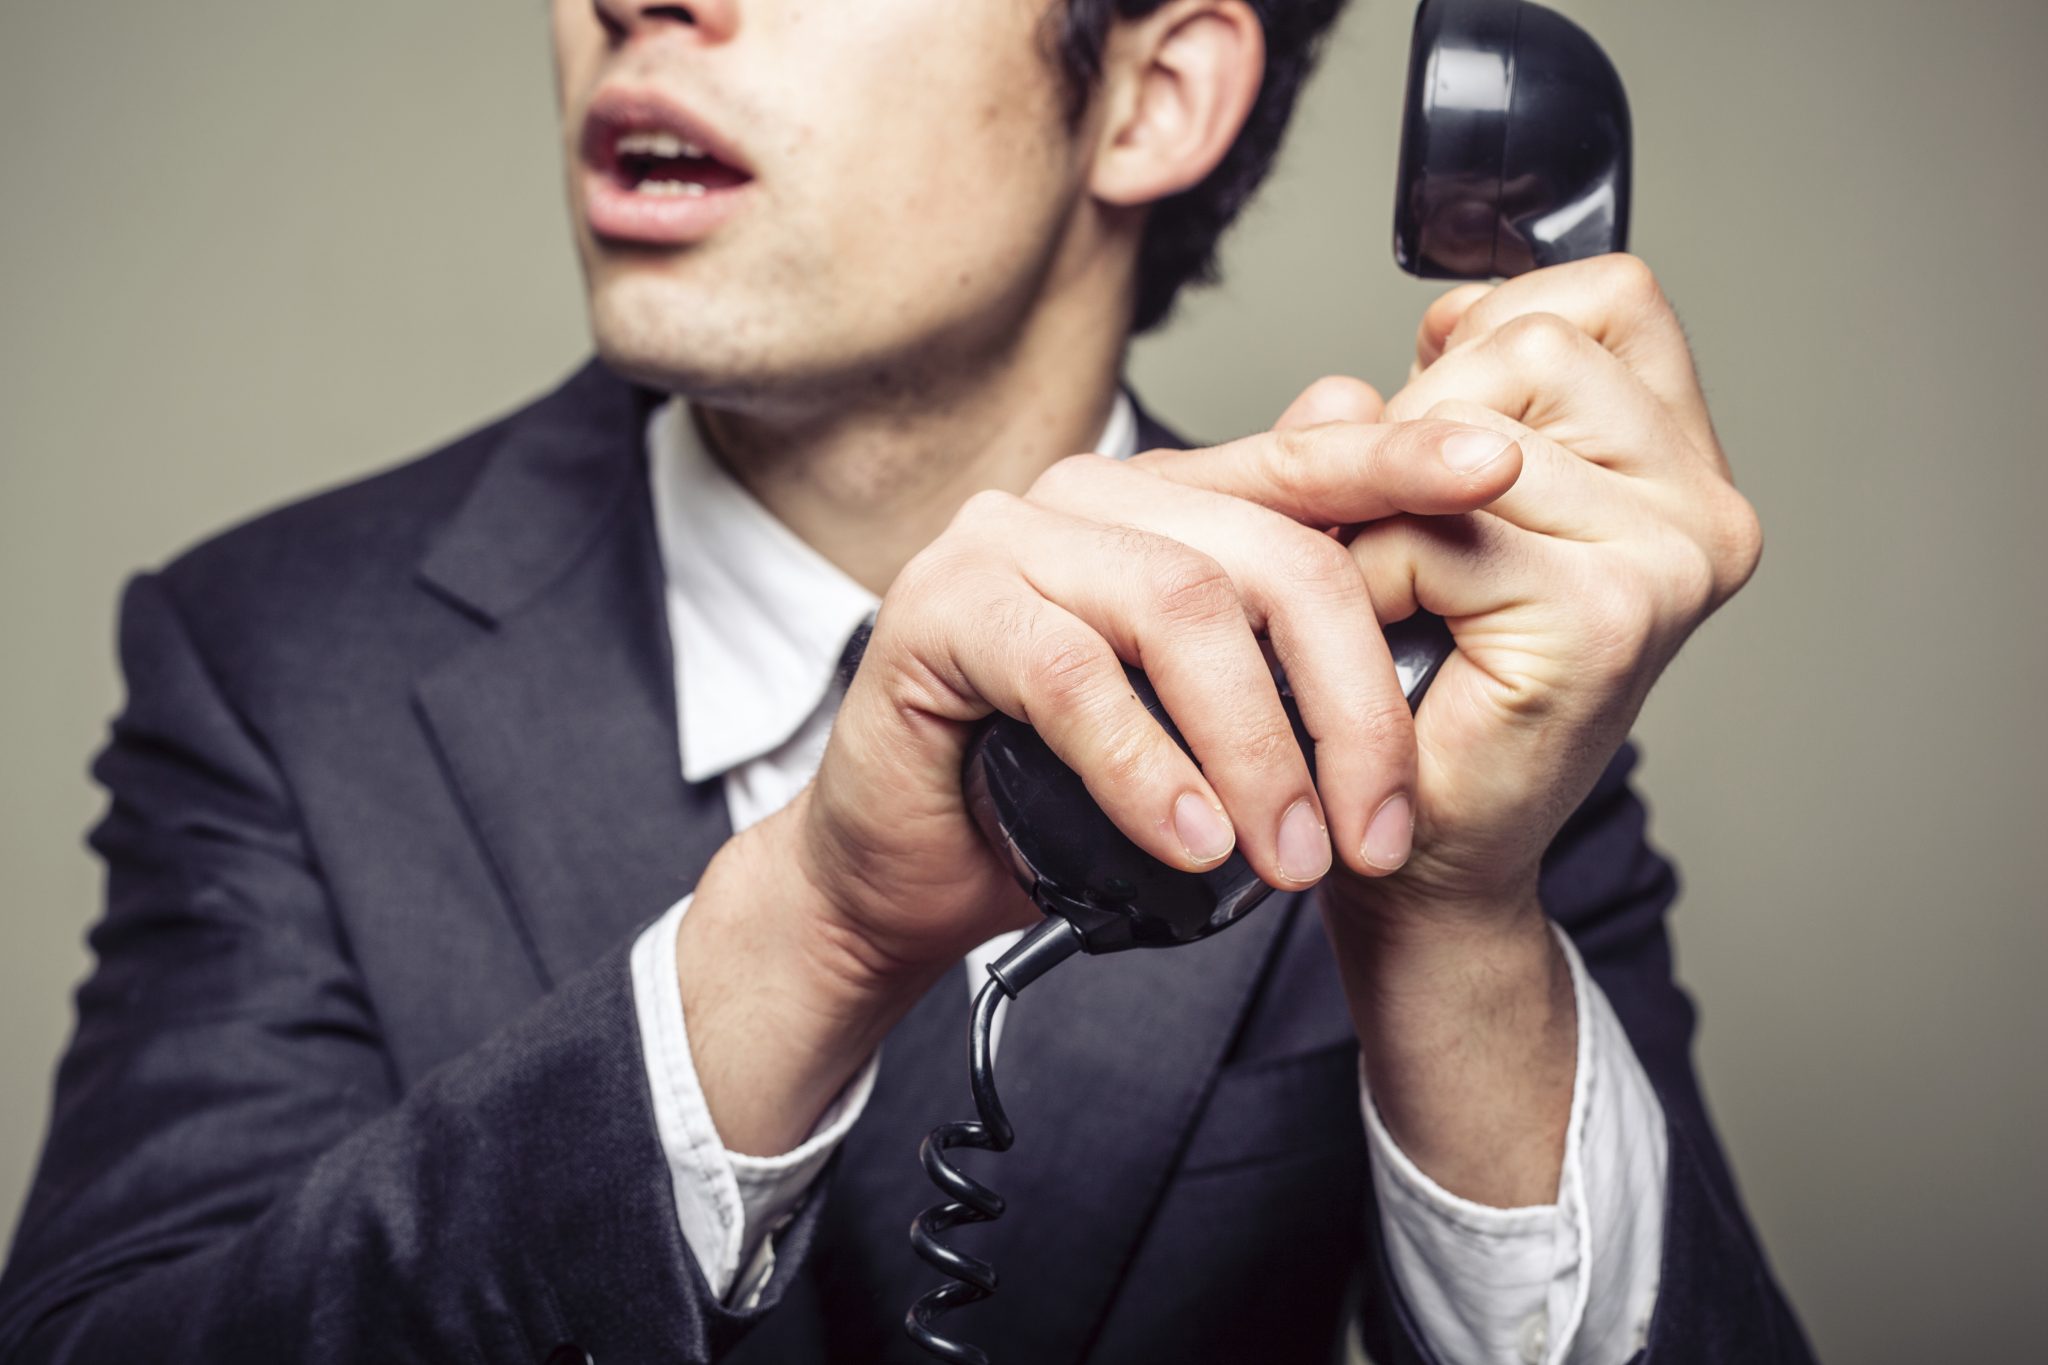 Have you been getting strange calls from Microsoft or Google?